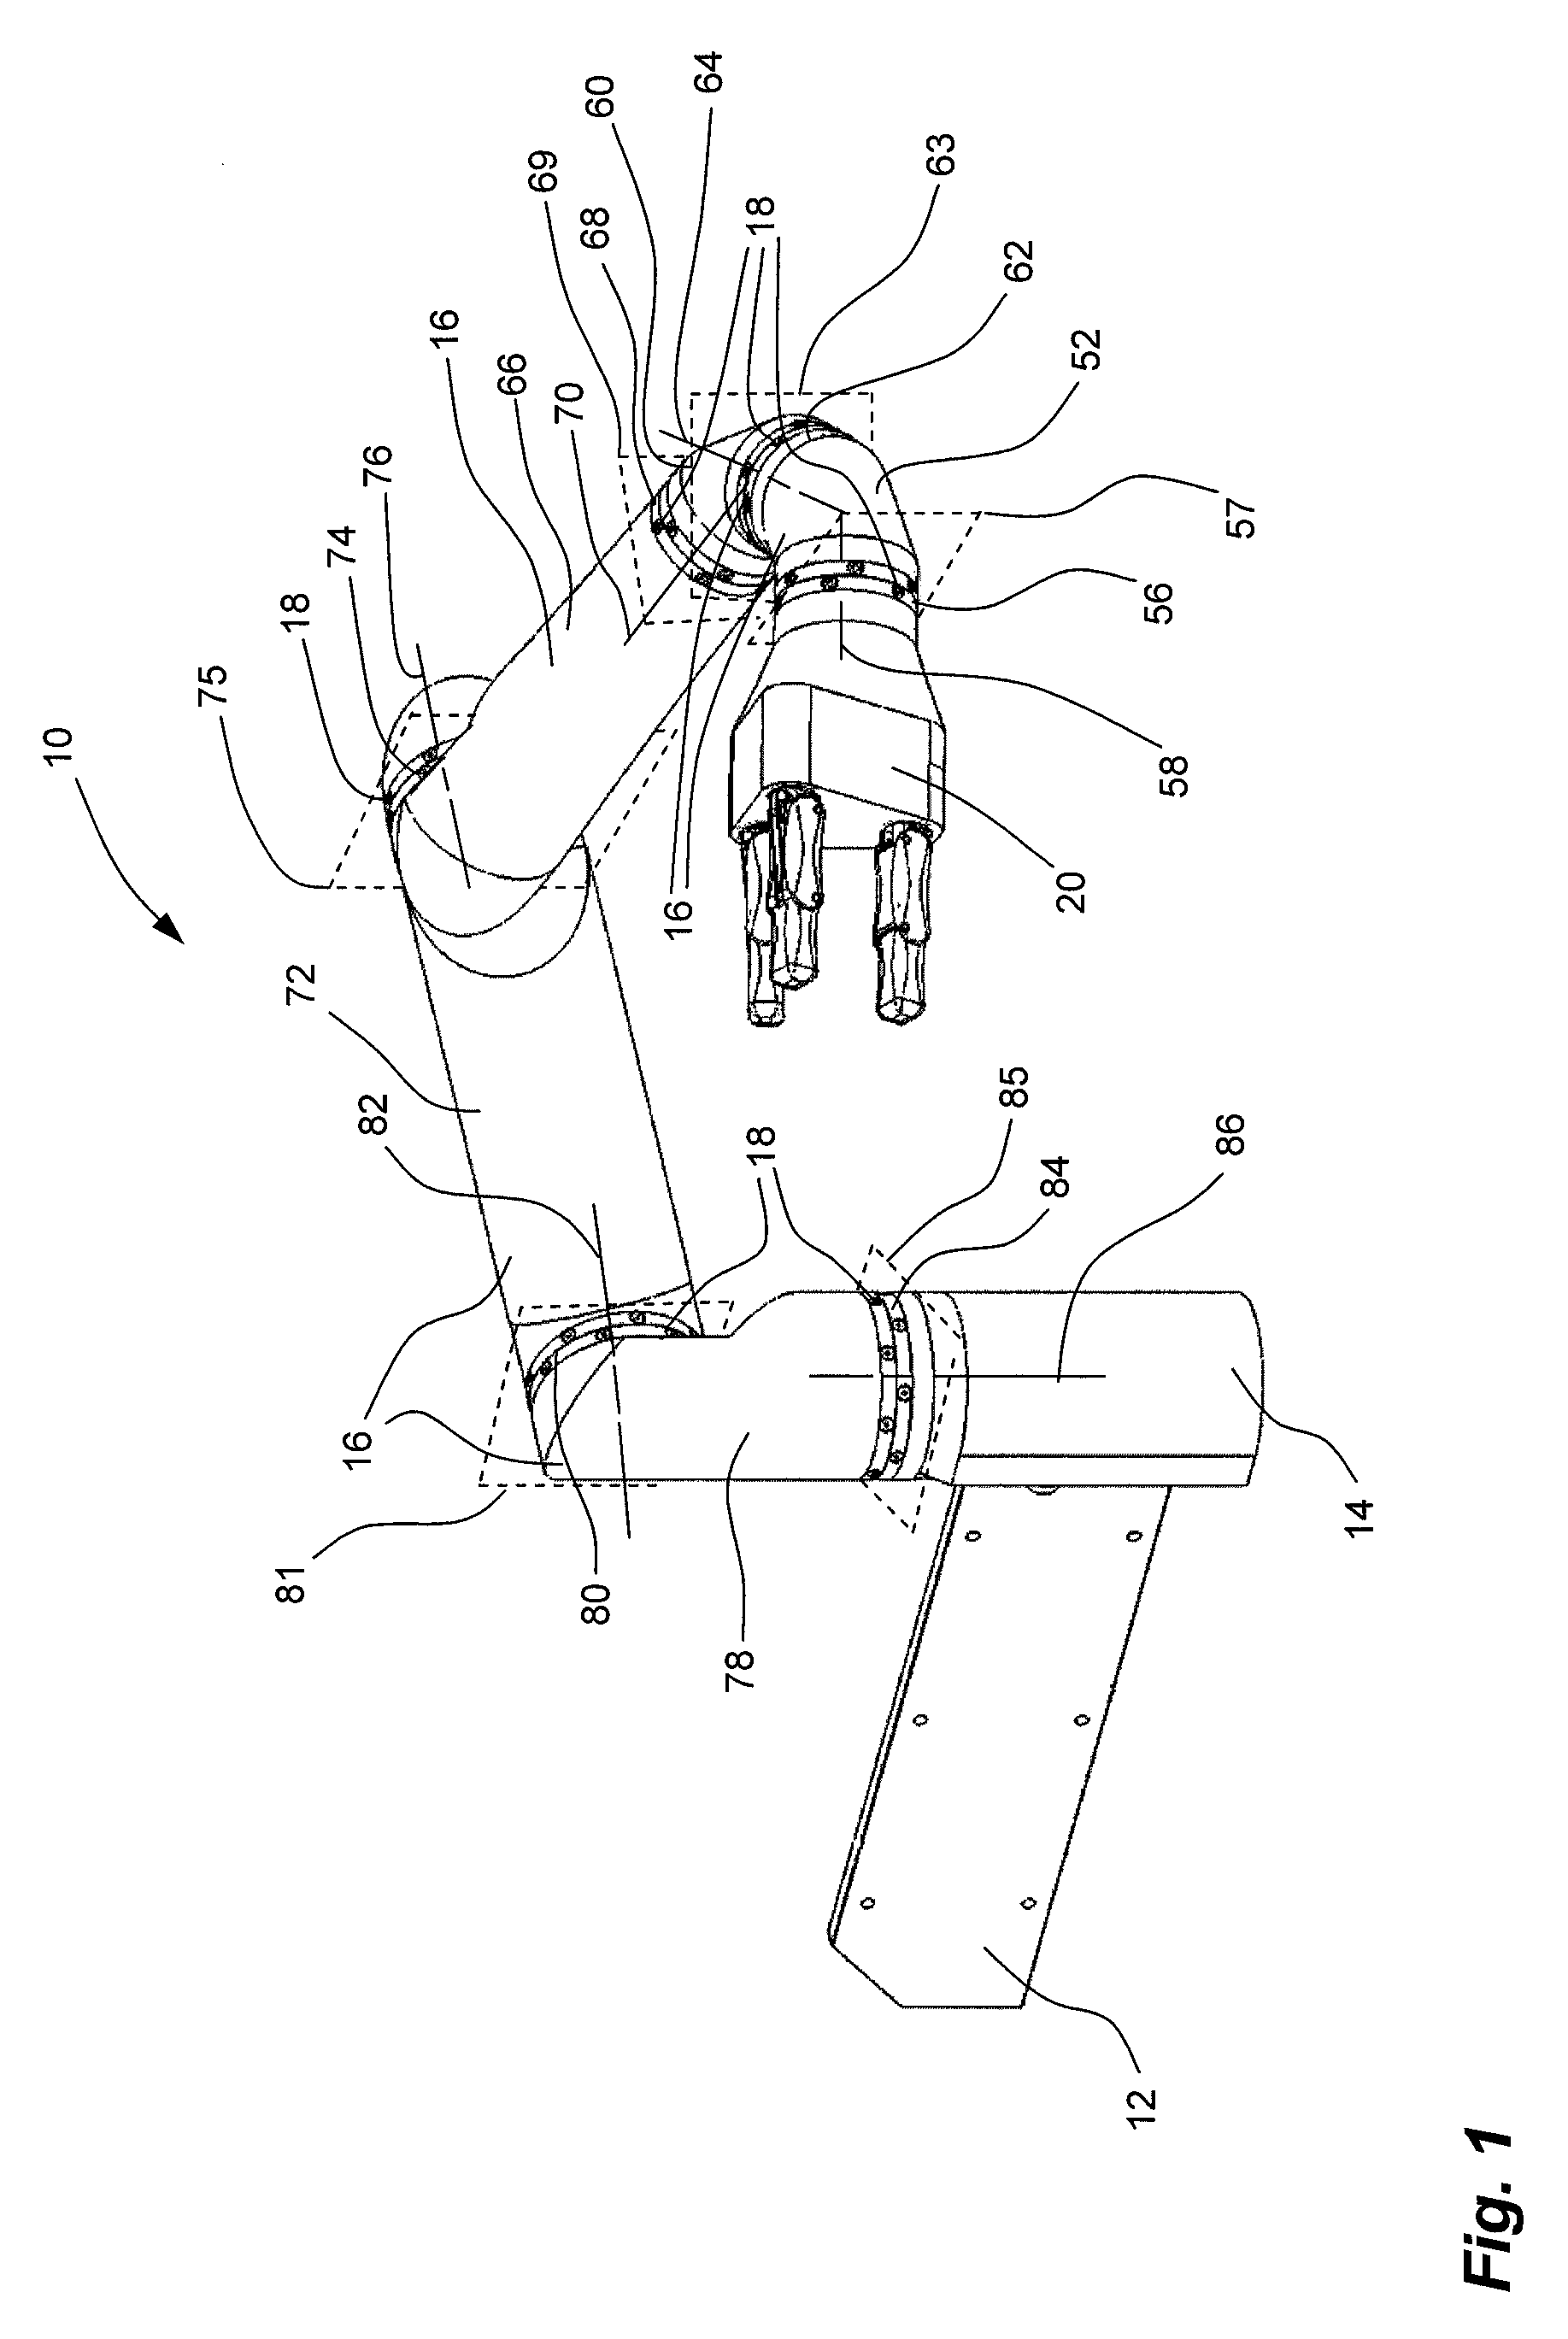 Robotic arm with a plurality of motorized joints